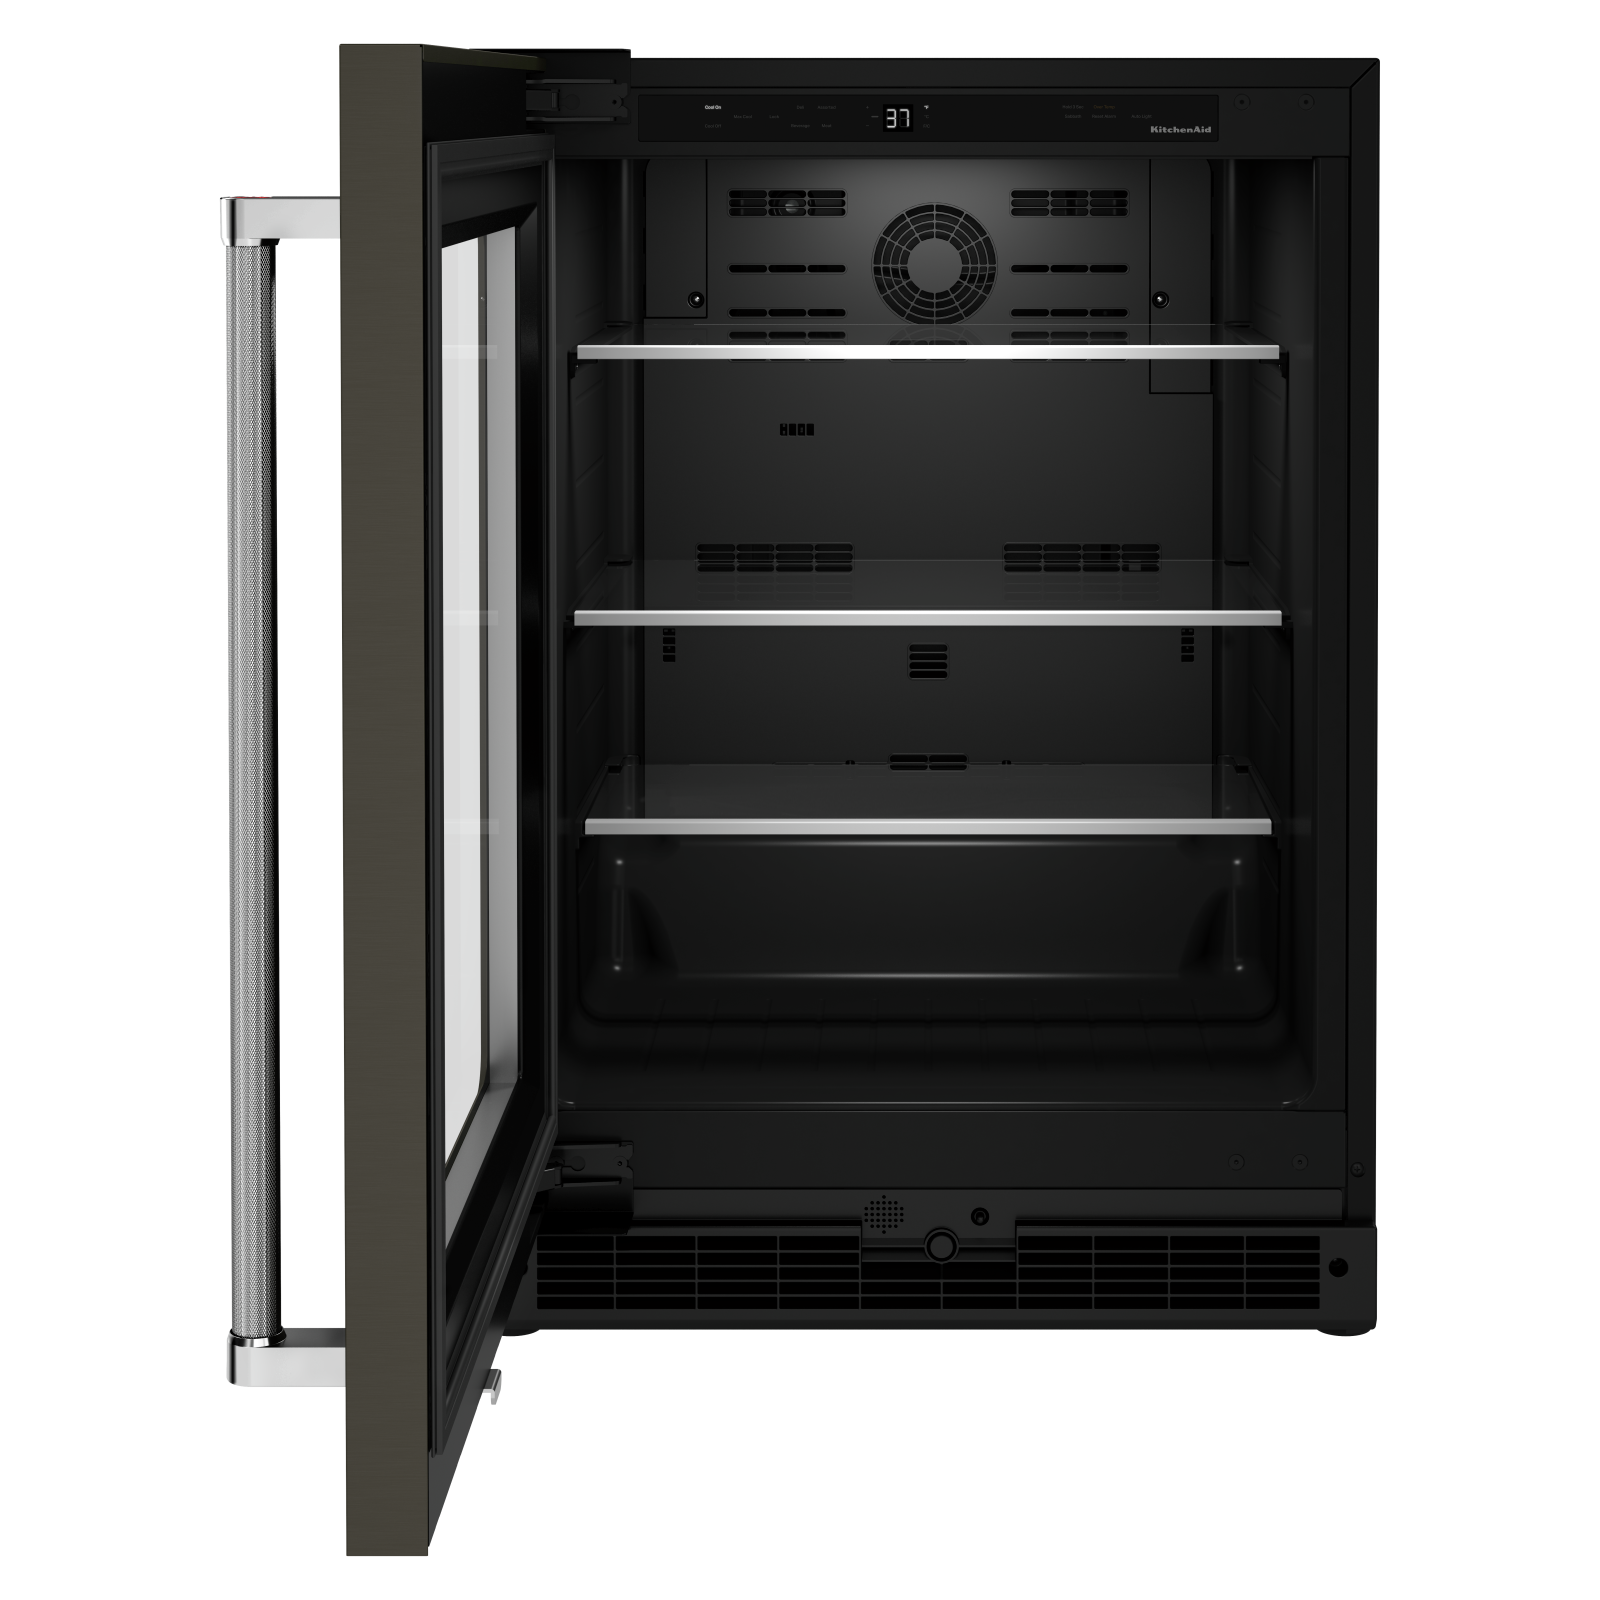 KitchenAid - 23.875 Inch 5.2 cu. ft Undercounter Refrigerator in Black Stainless - KURL314KBS